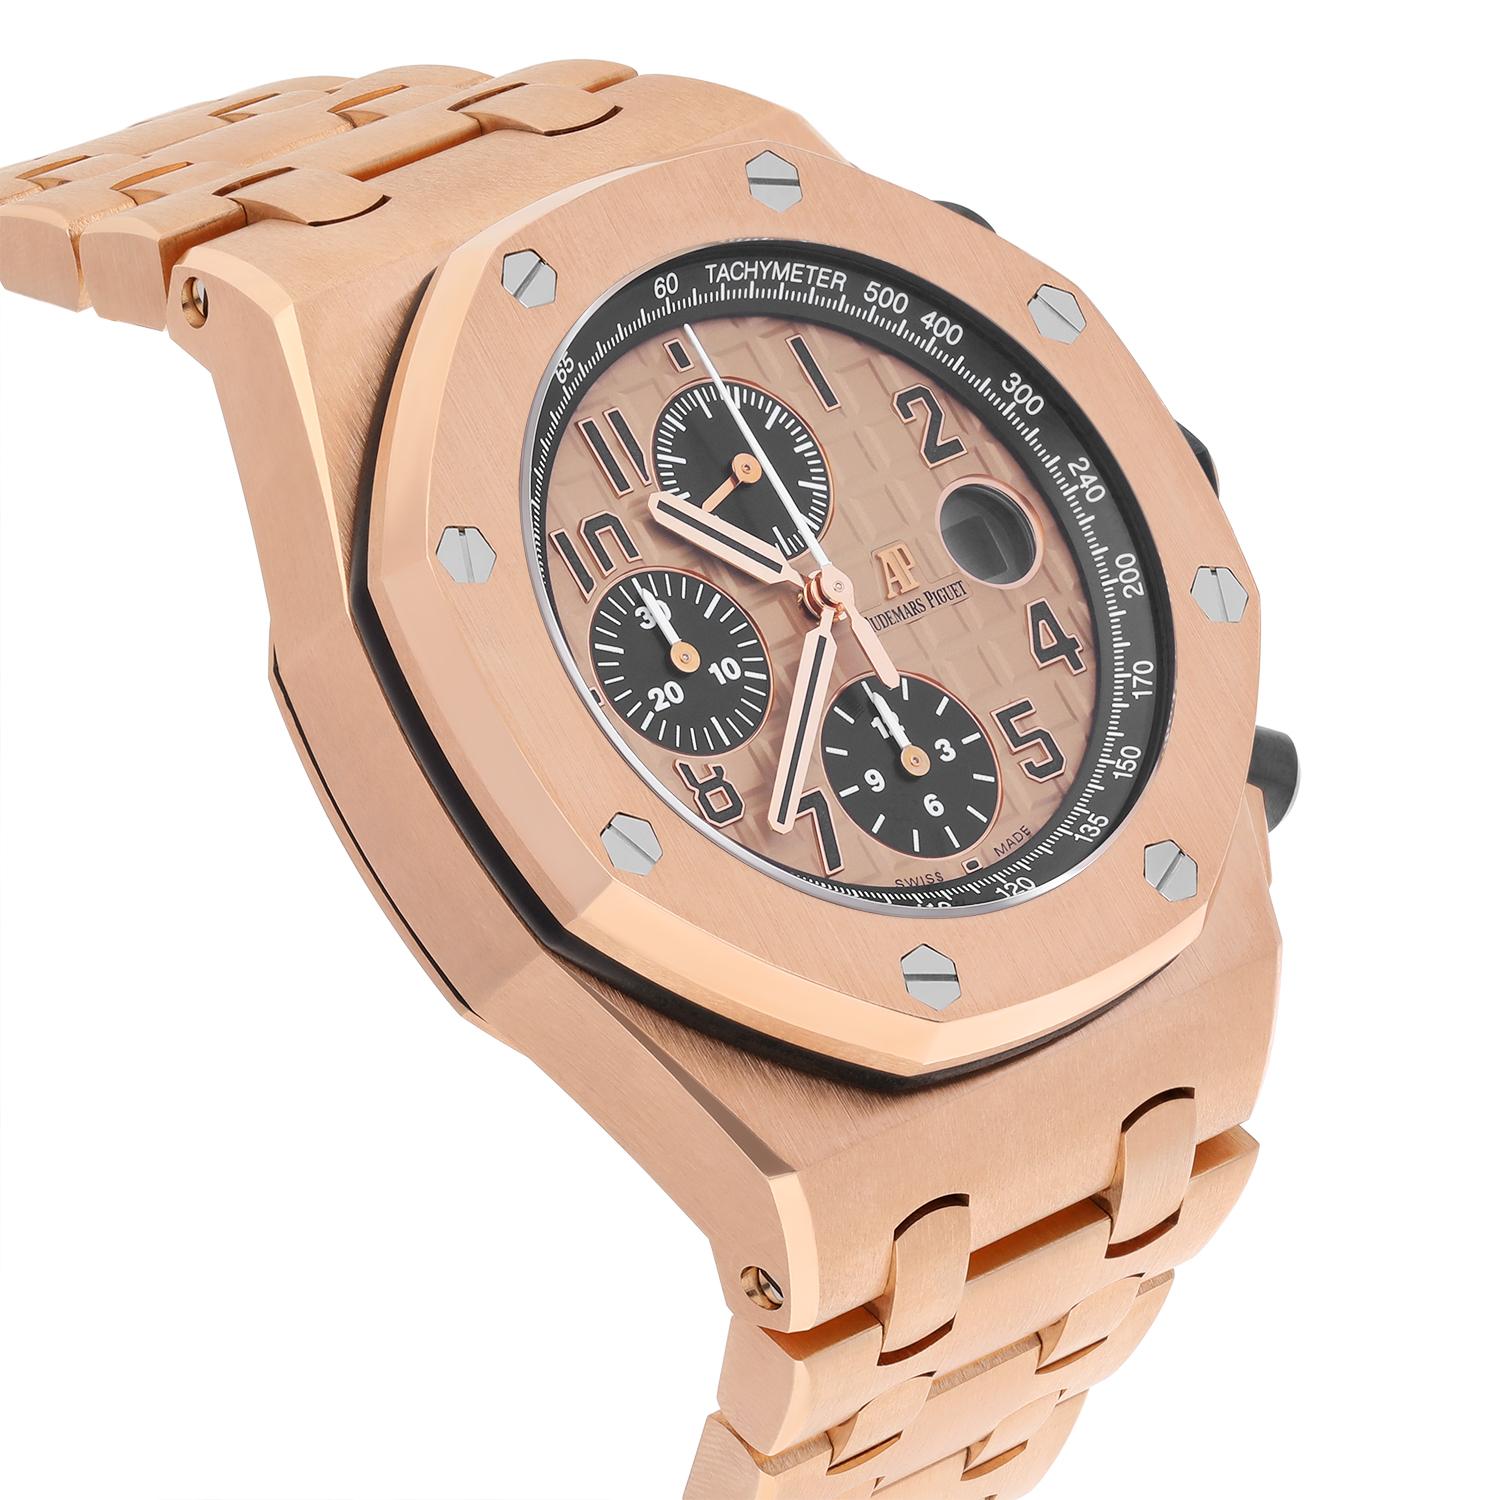 Audemars Piguet Royal Oak Offshore Chronograph 26470OR 18kt Rose Gold Complete In Excellent Condition For Sale In New York, NY